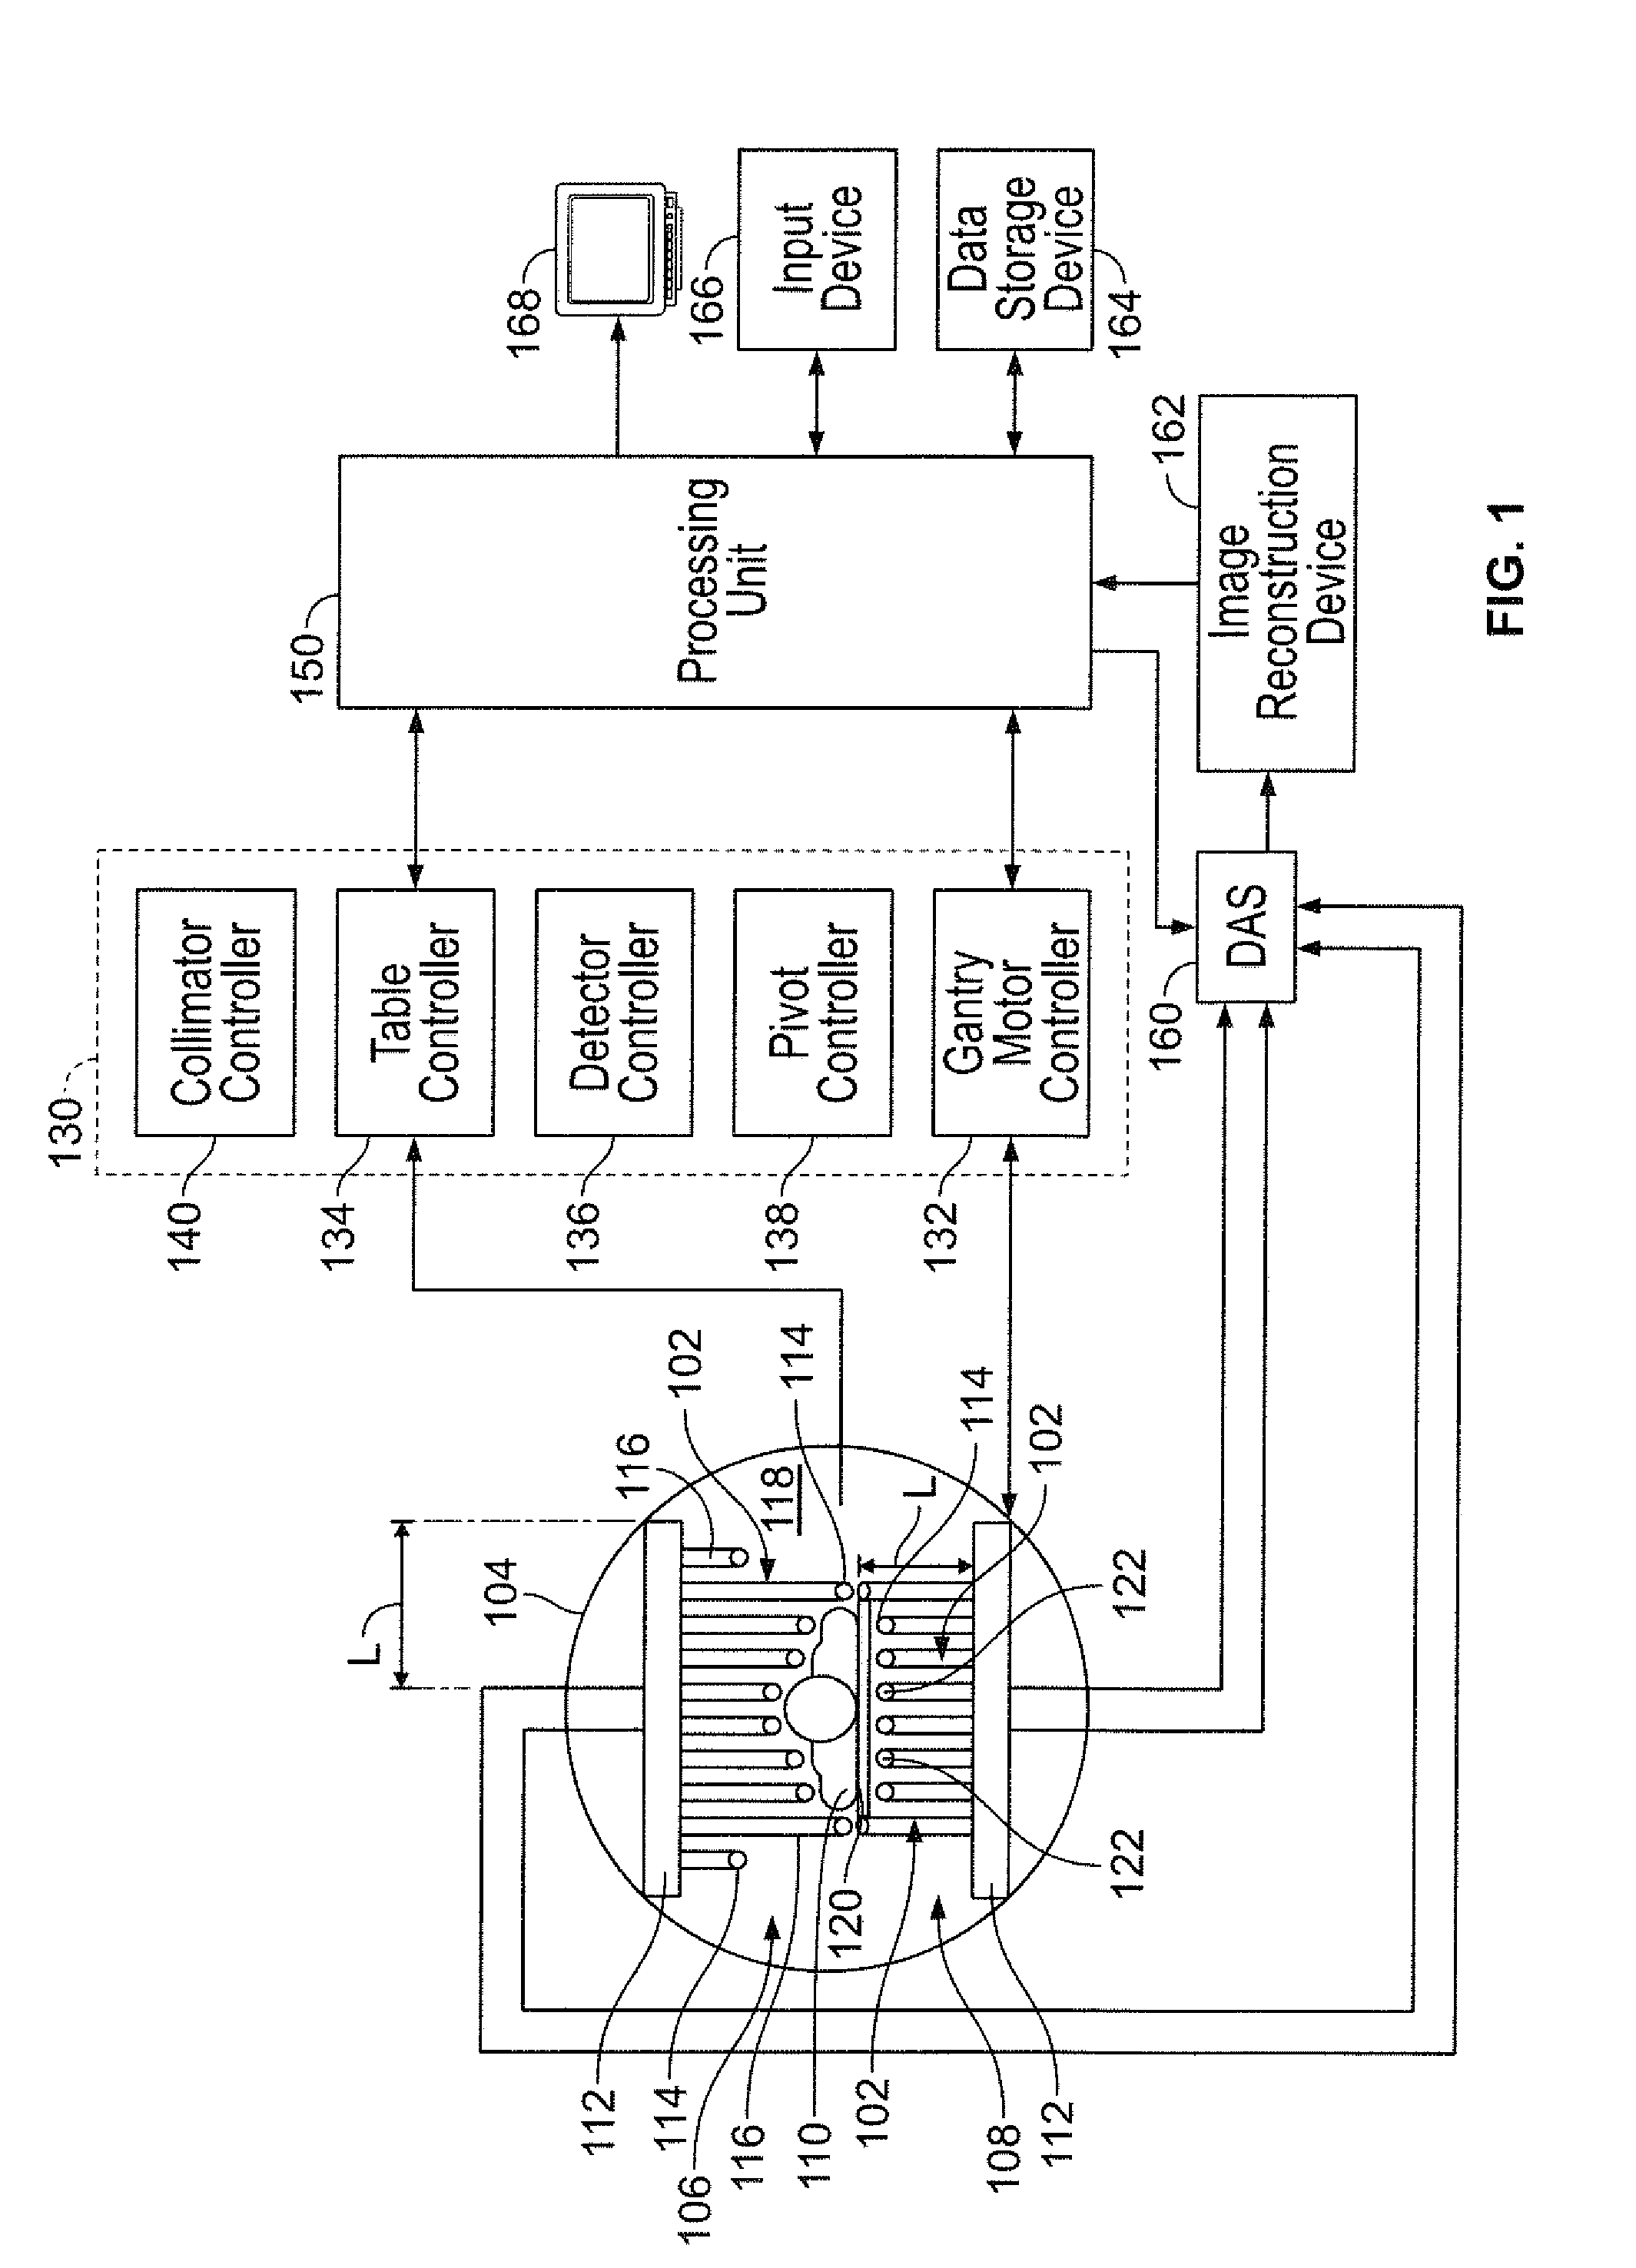 Systems and methods for controlling motion of detectors having moving detector heads